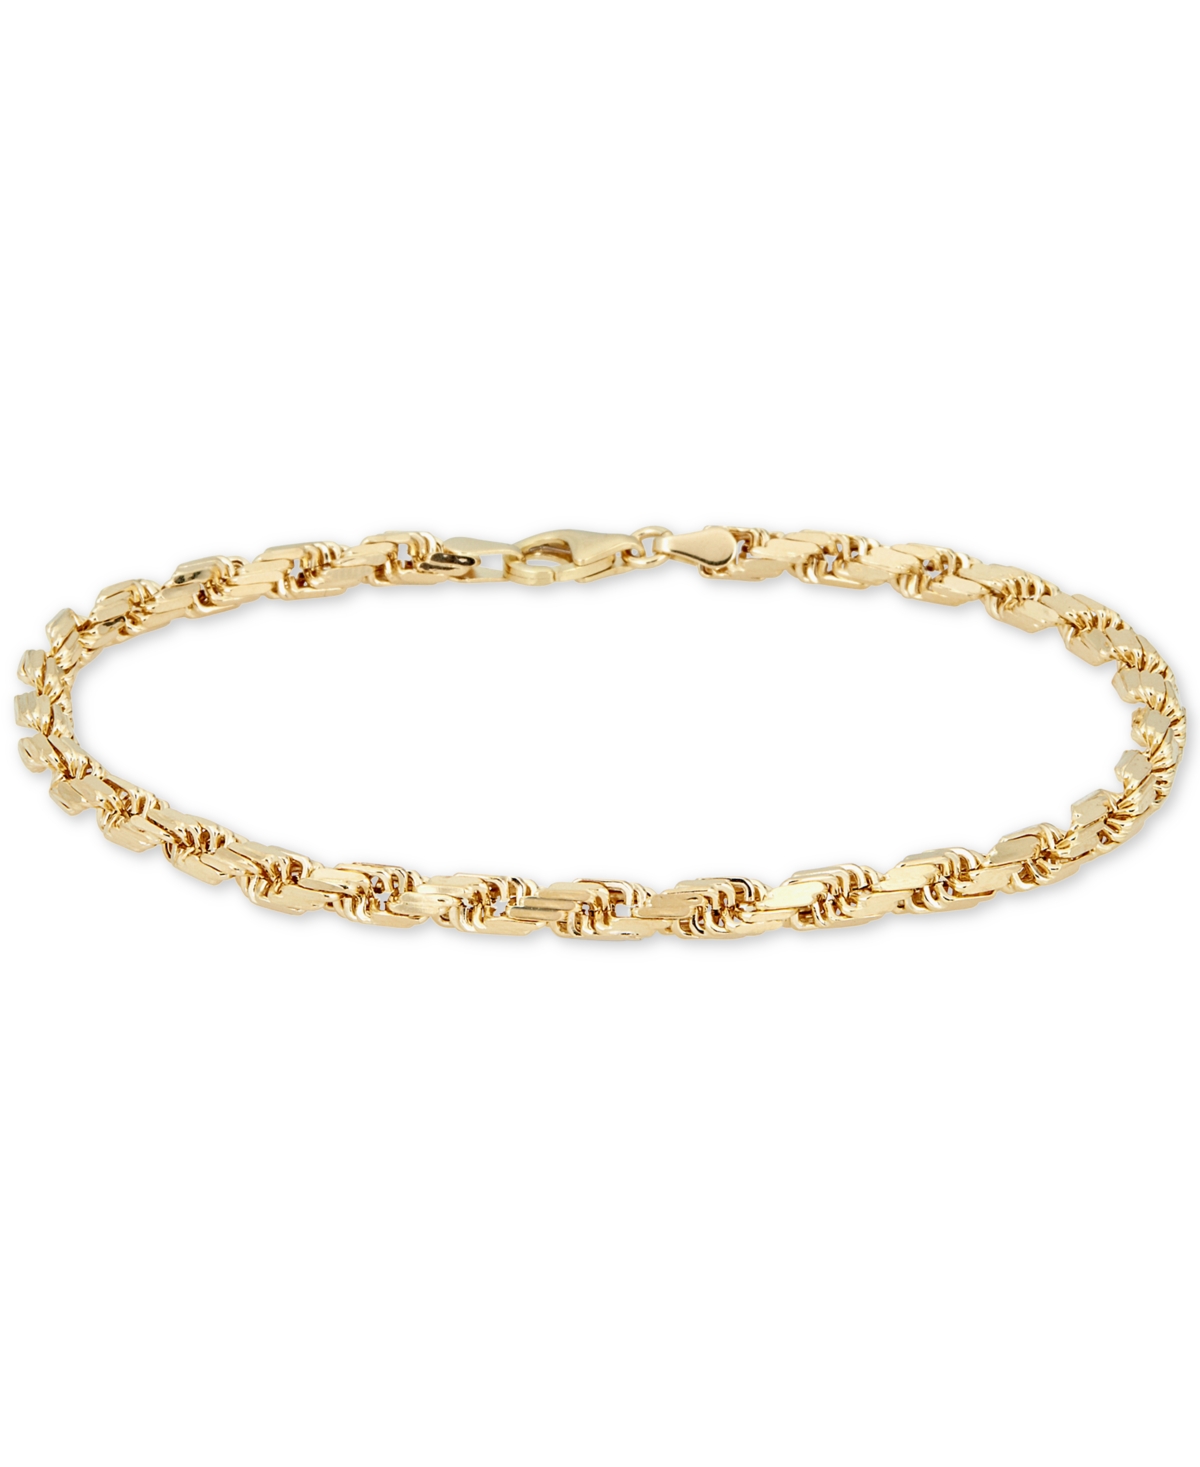 Diamond Cut Rope Chain Bracelet (4mm) in 14k Gold, Made in Italy - Yellow Gold